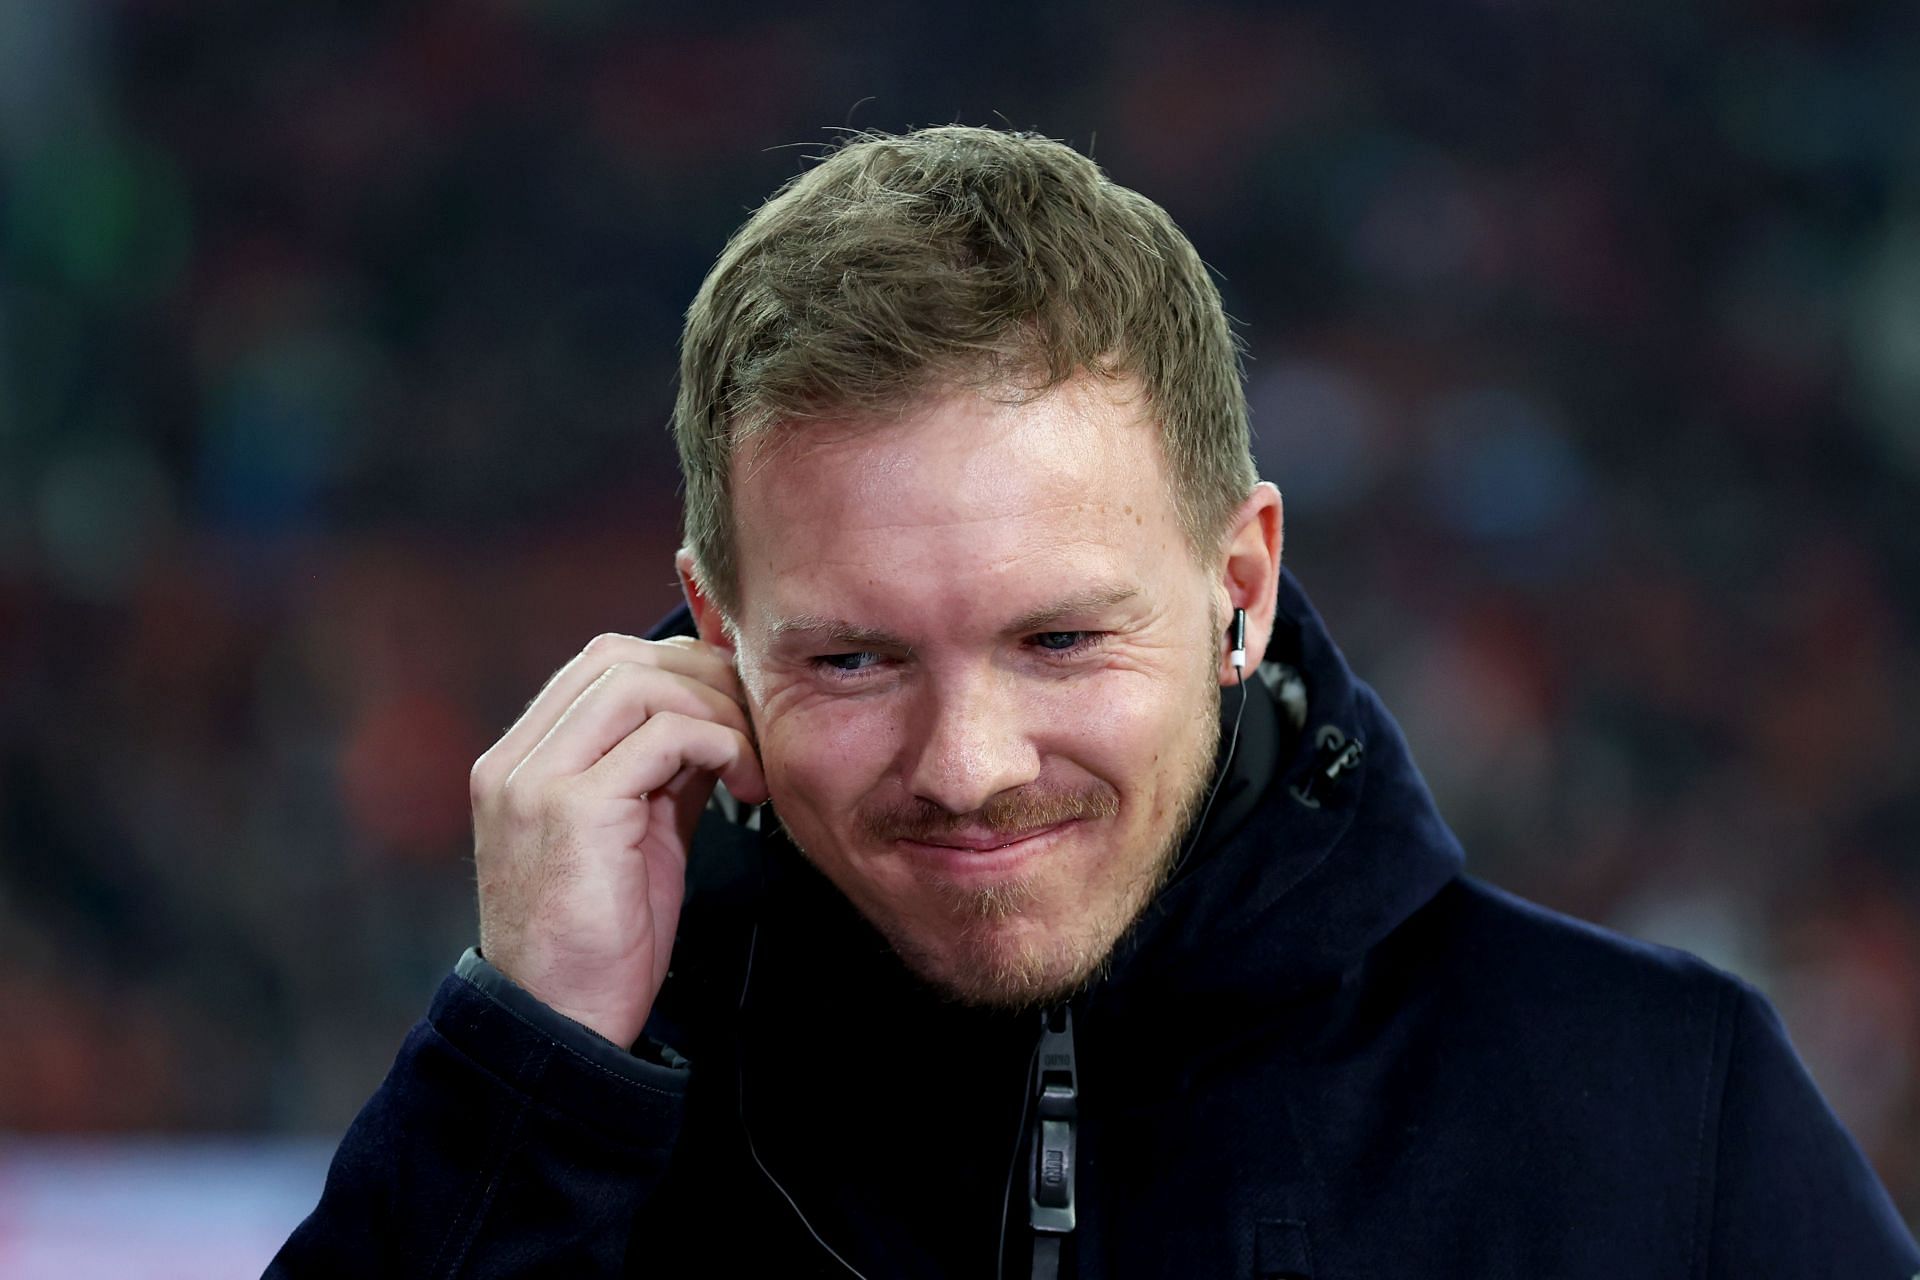 Julian Nagelsmann is yet to make a decision on his future.